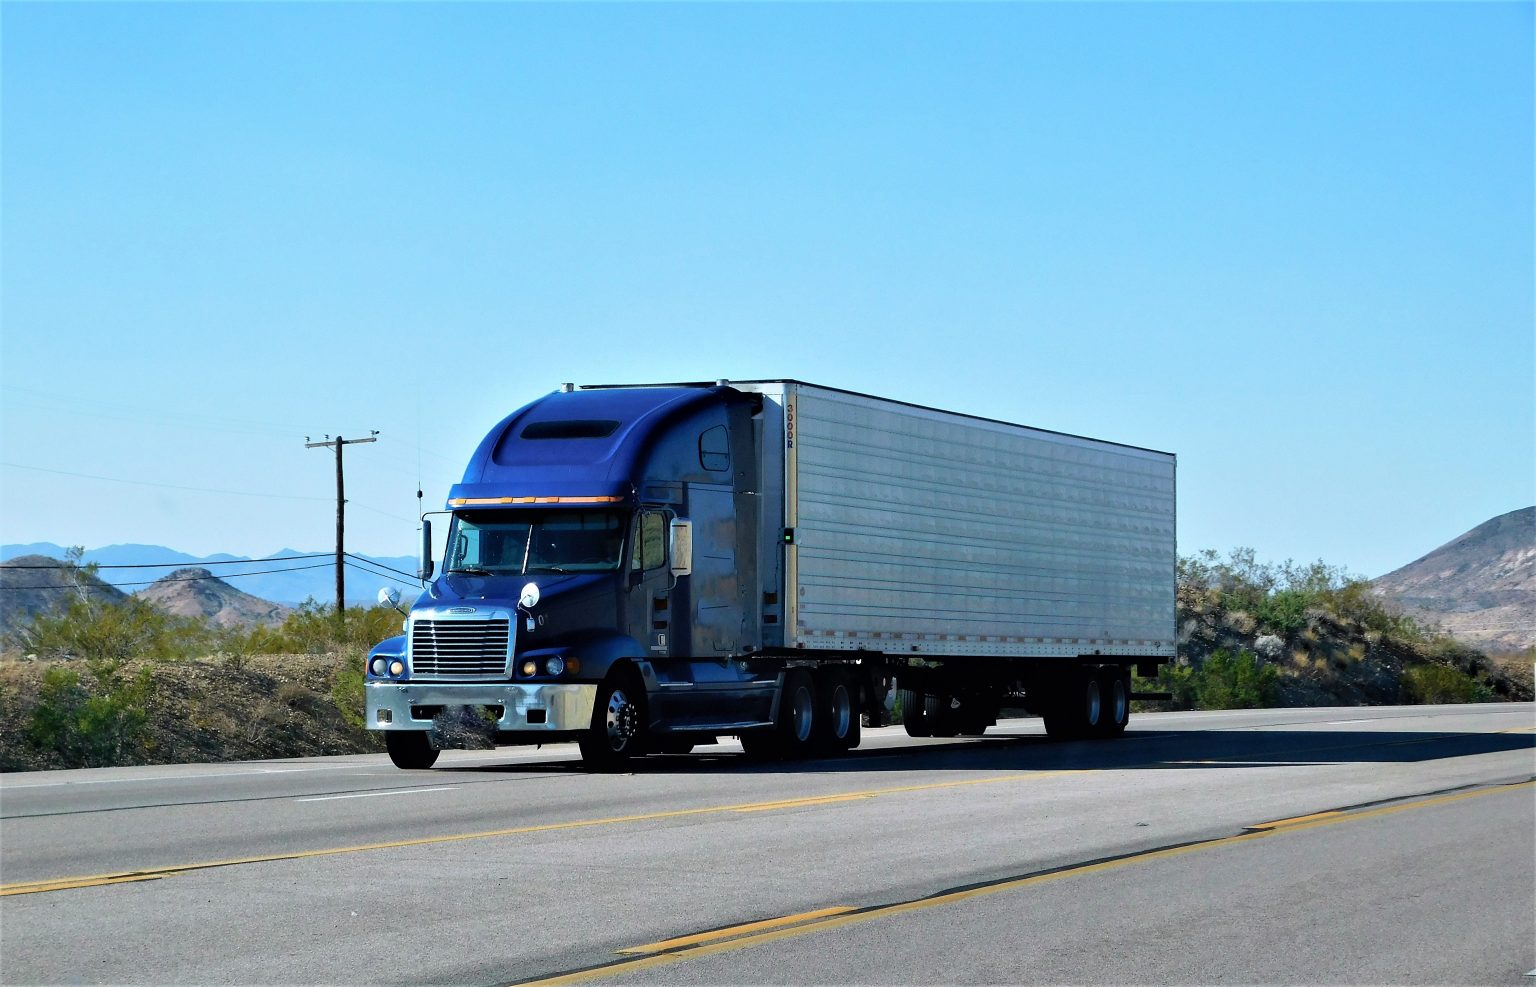 LTL Freight Shipping Services | Less-Than-Truckload Shipping